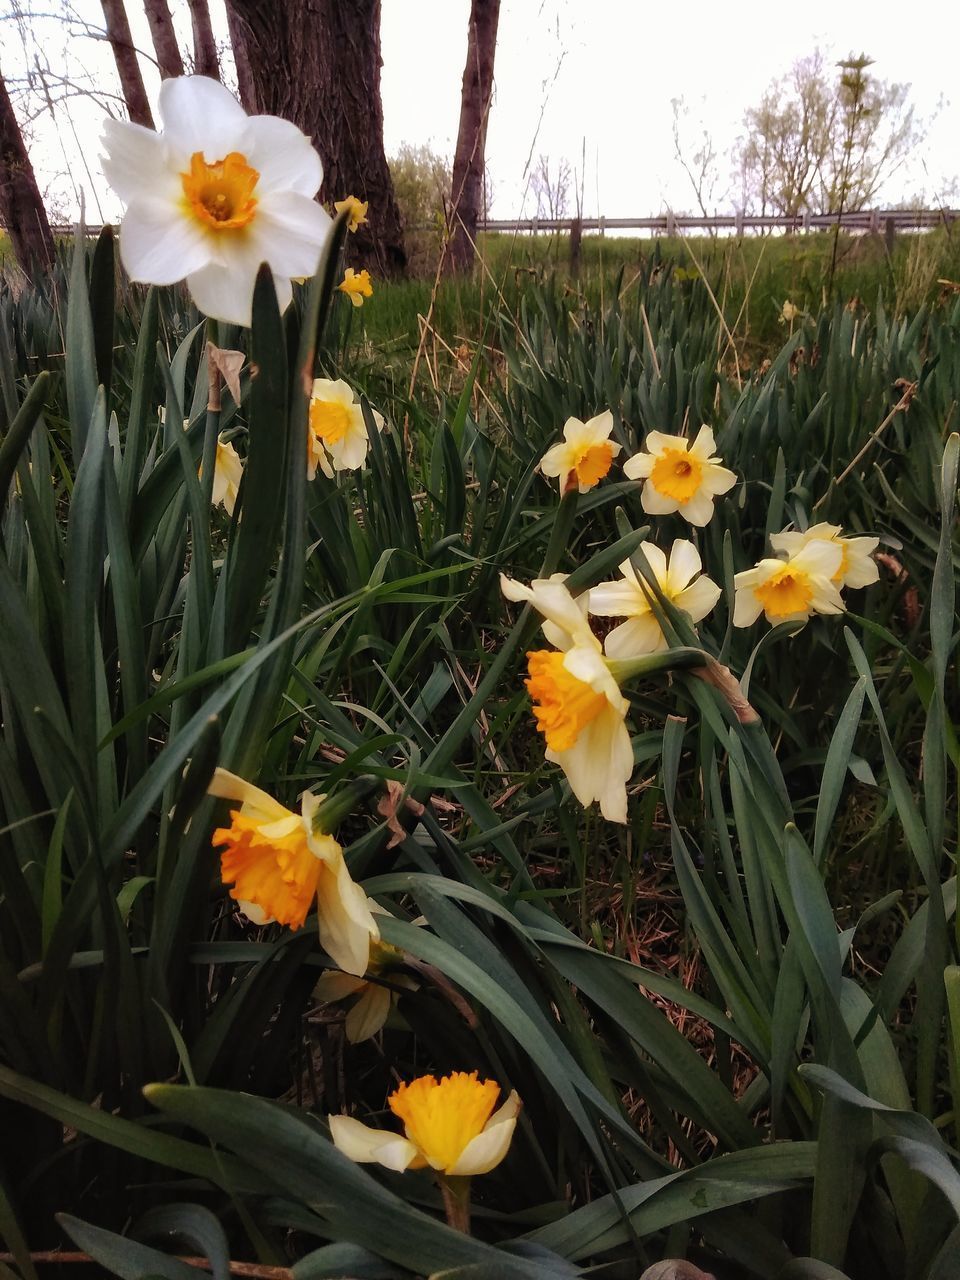 CLOSE-UP OF FRESH YELLOW DAFFODIL FLOWERS IN FIELD